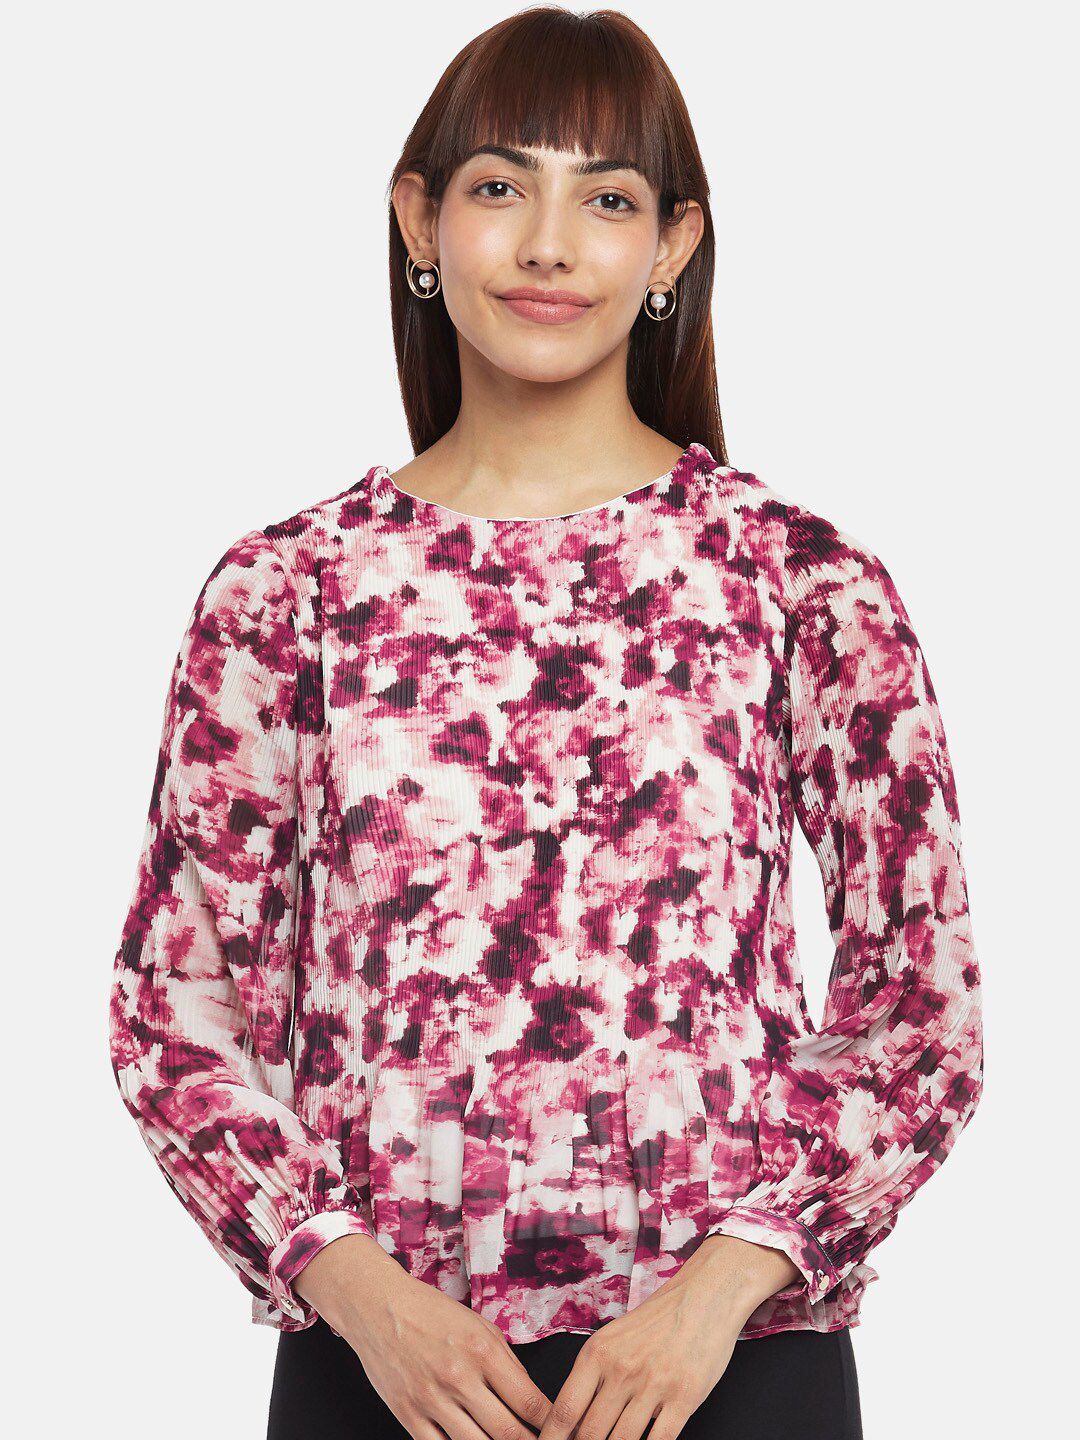 Annabelle by Pantaloons Women Pink Abstract Print Long Sleeves Peplum Top Price in India